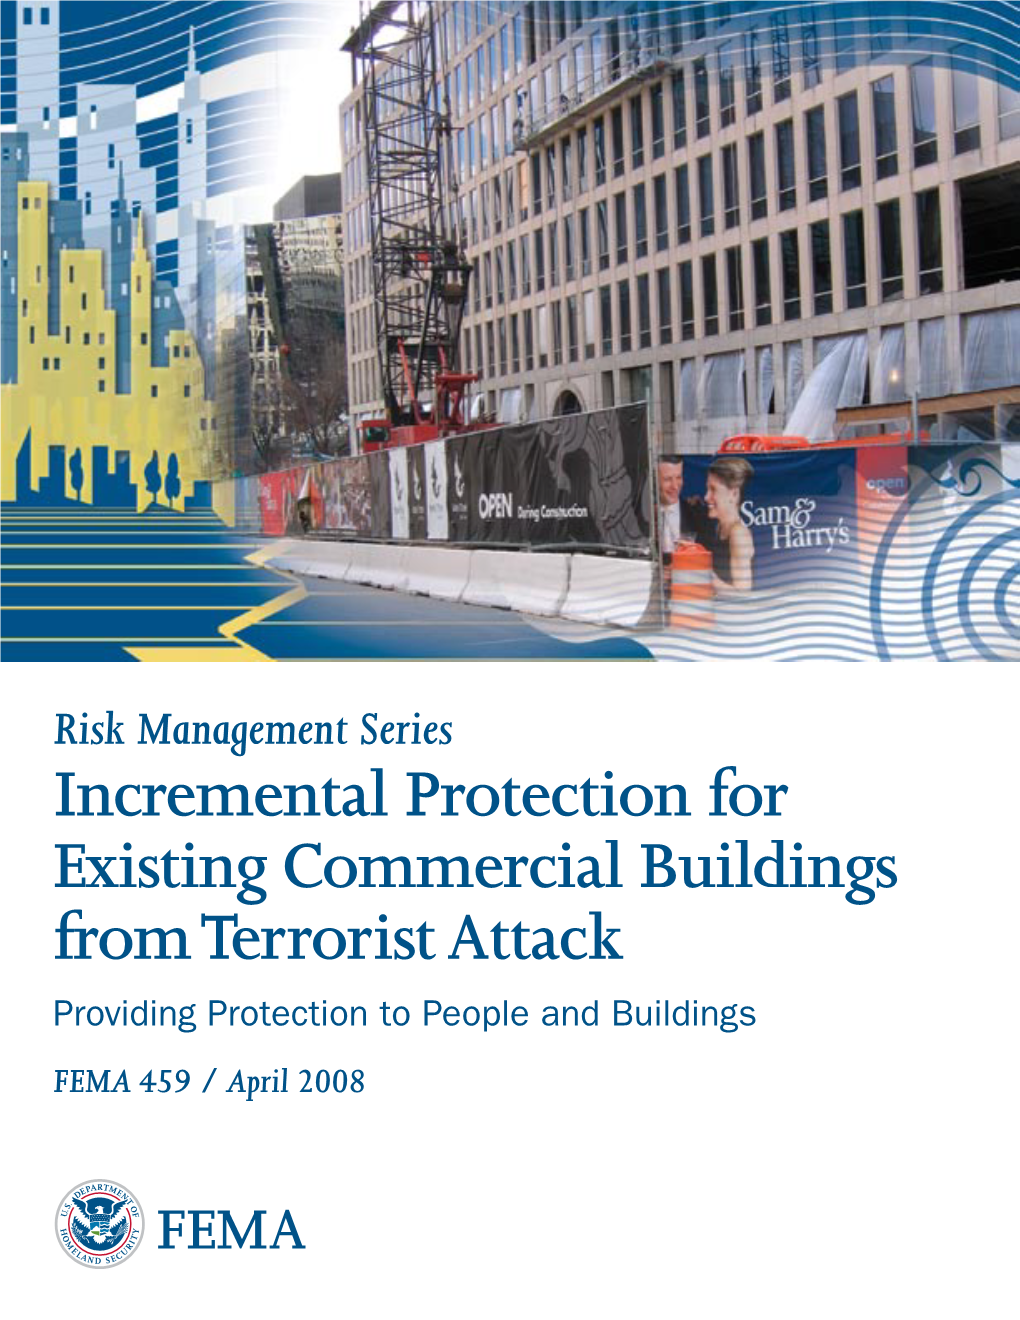 Incremental Protection for Existing Commercial Buildings from Terrorist Attack Providing Protection to People and Buildings FEMA 459 / April 2008